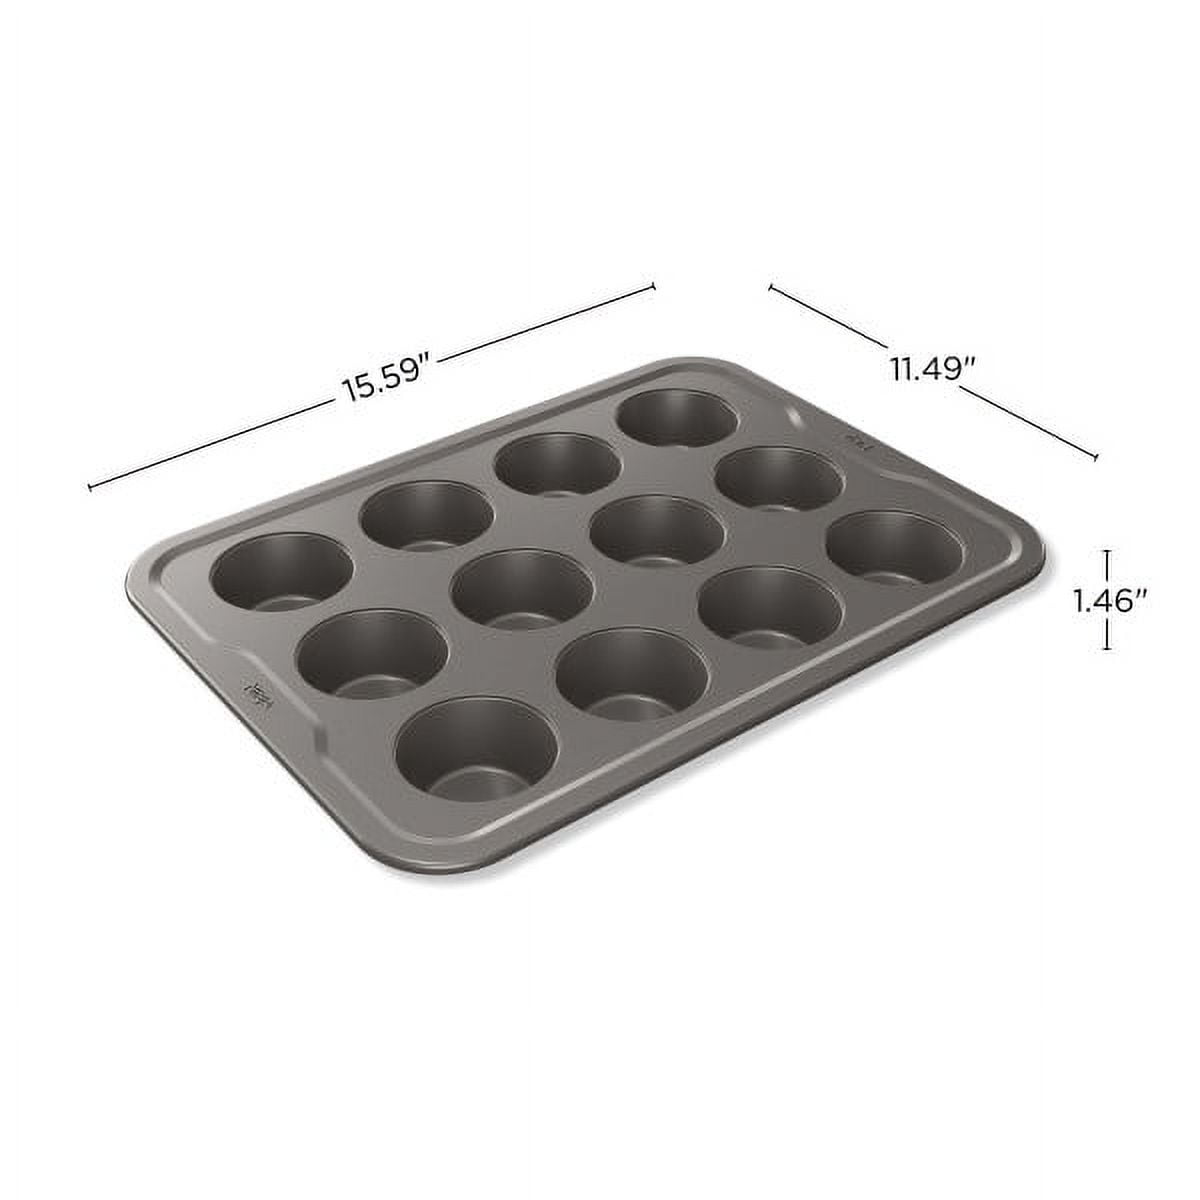 Gotham Steel 12 Cup Nonstick Muffin Pan & Reviews